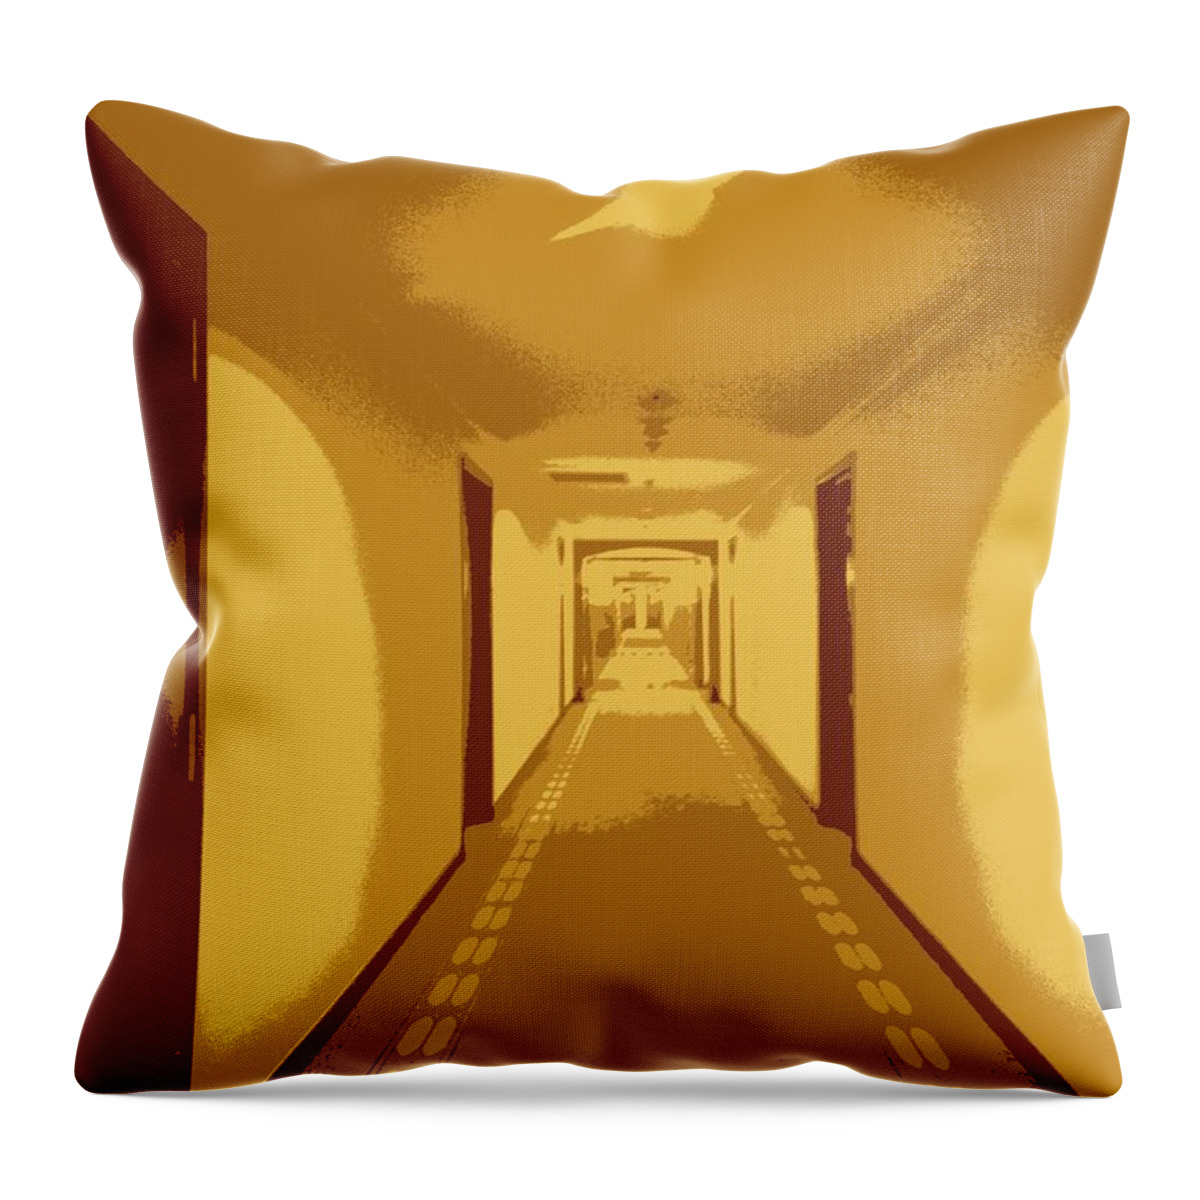 Hall Throw Pillow featuring the mixed media Hallway by Faa shie